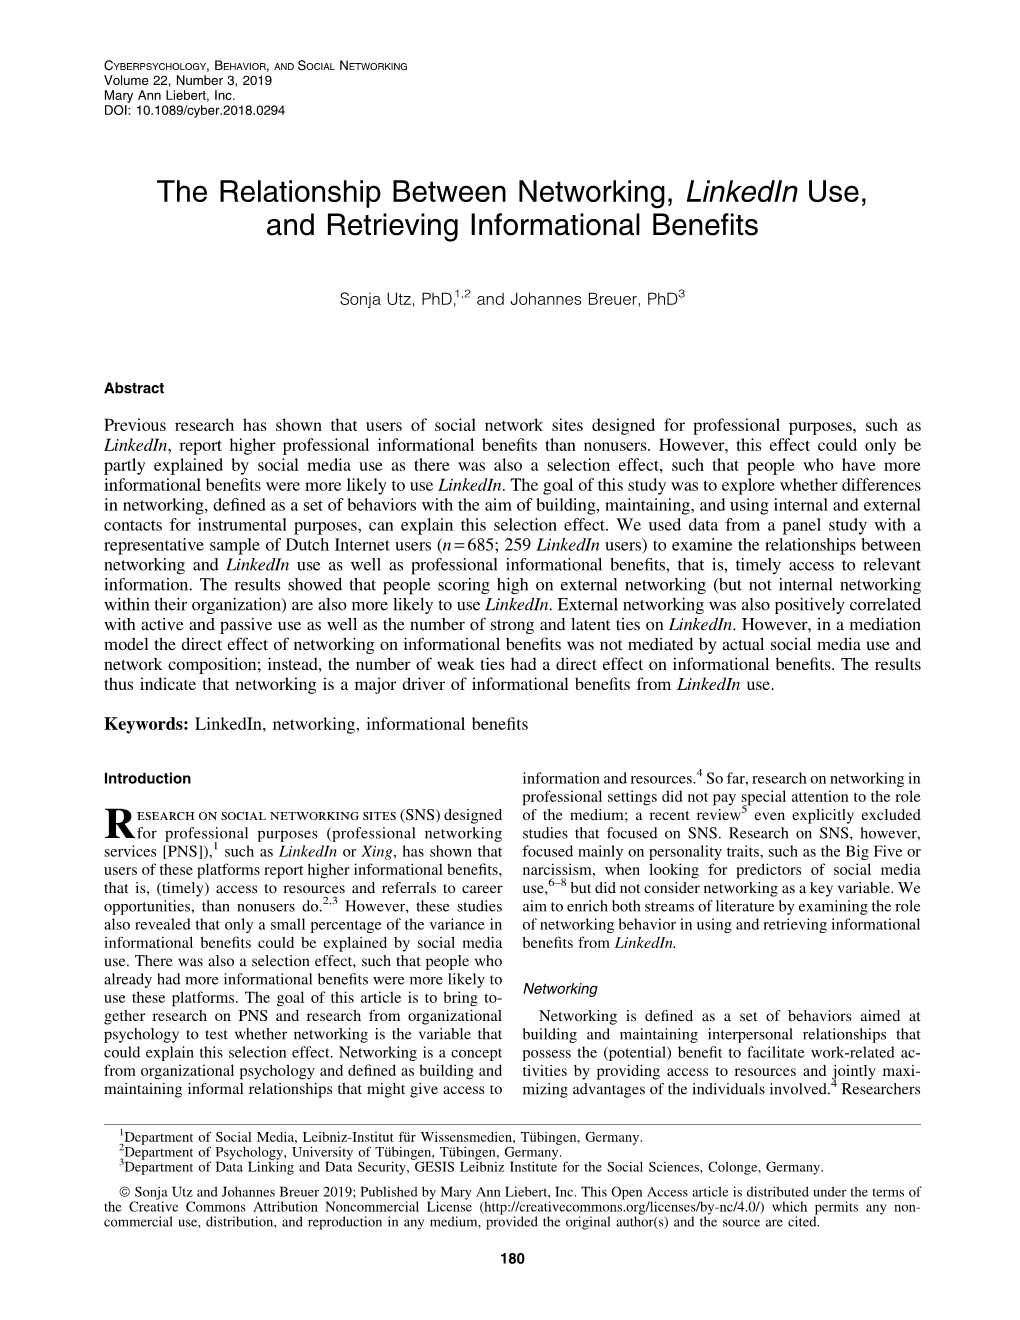 The Relationship Between Networking, Linkedin Use, and Retrieving Informational Beneﬁts